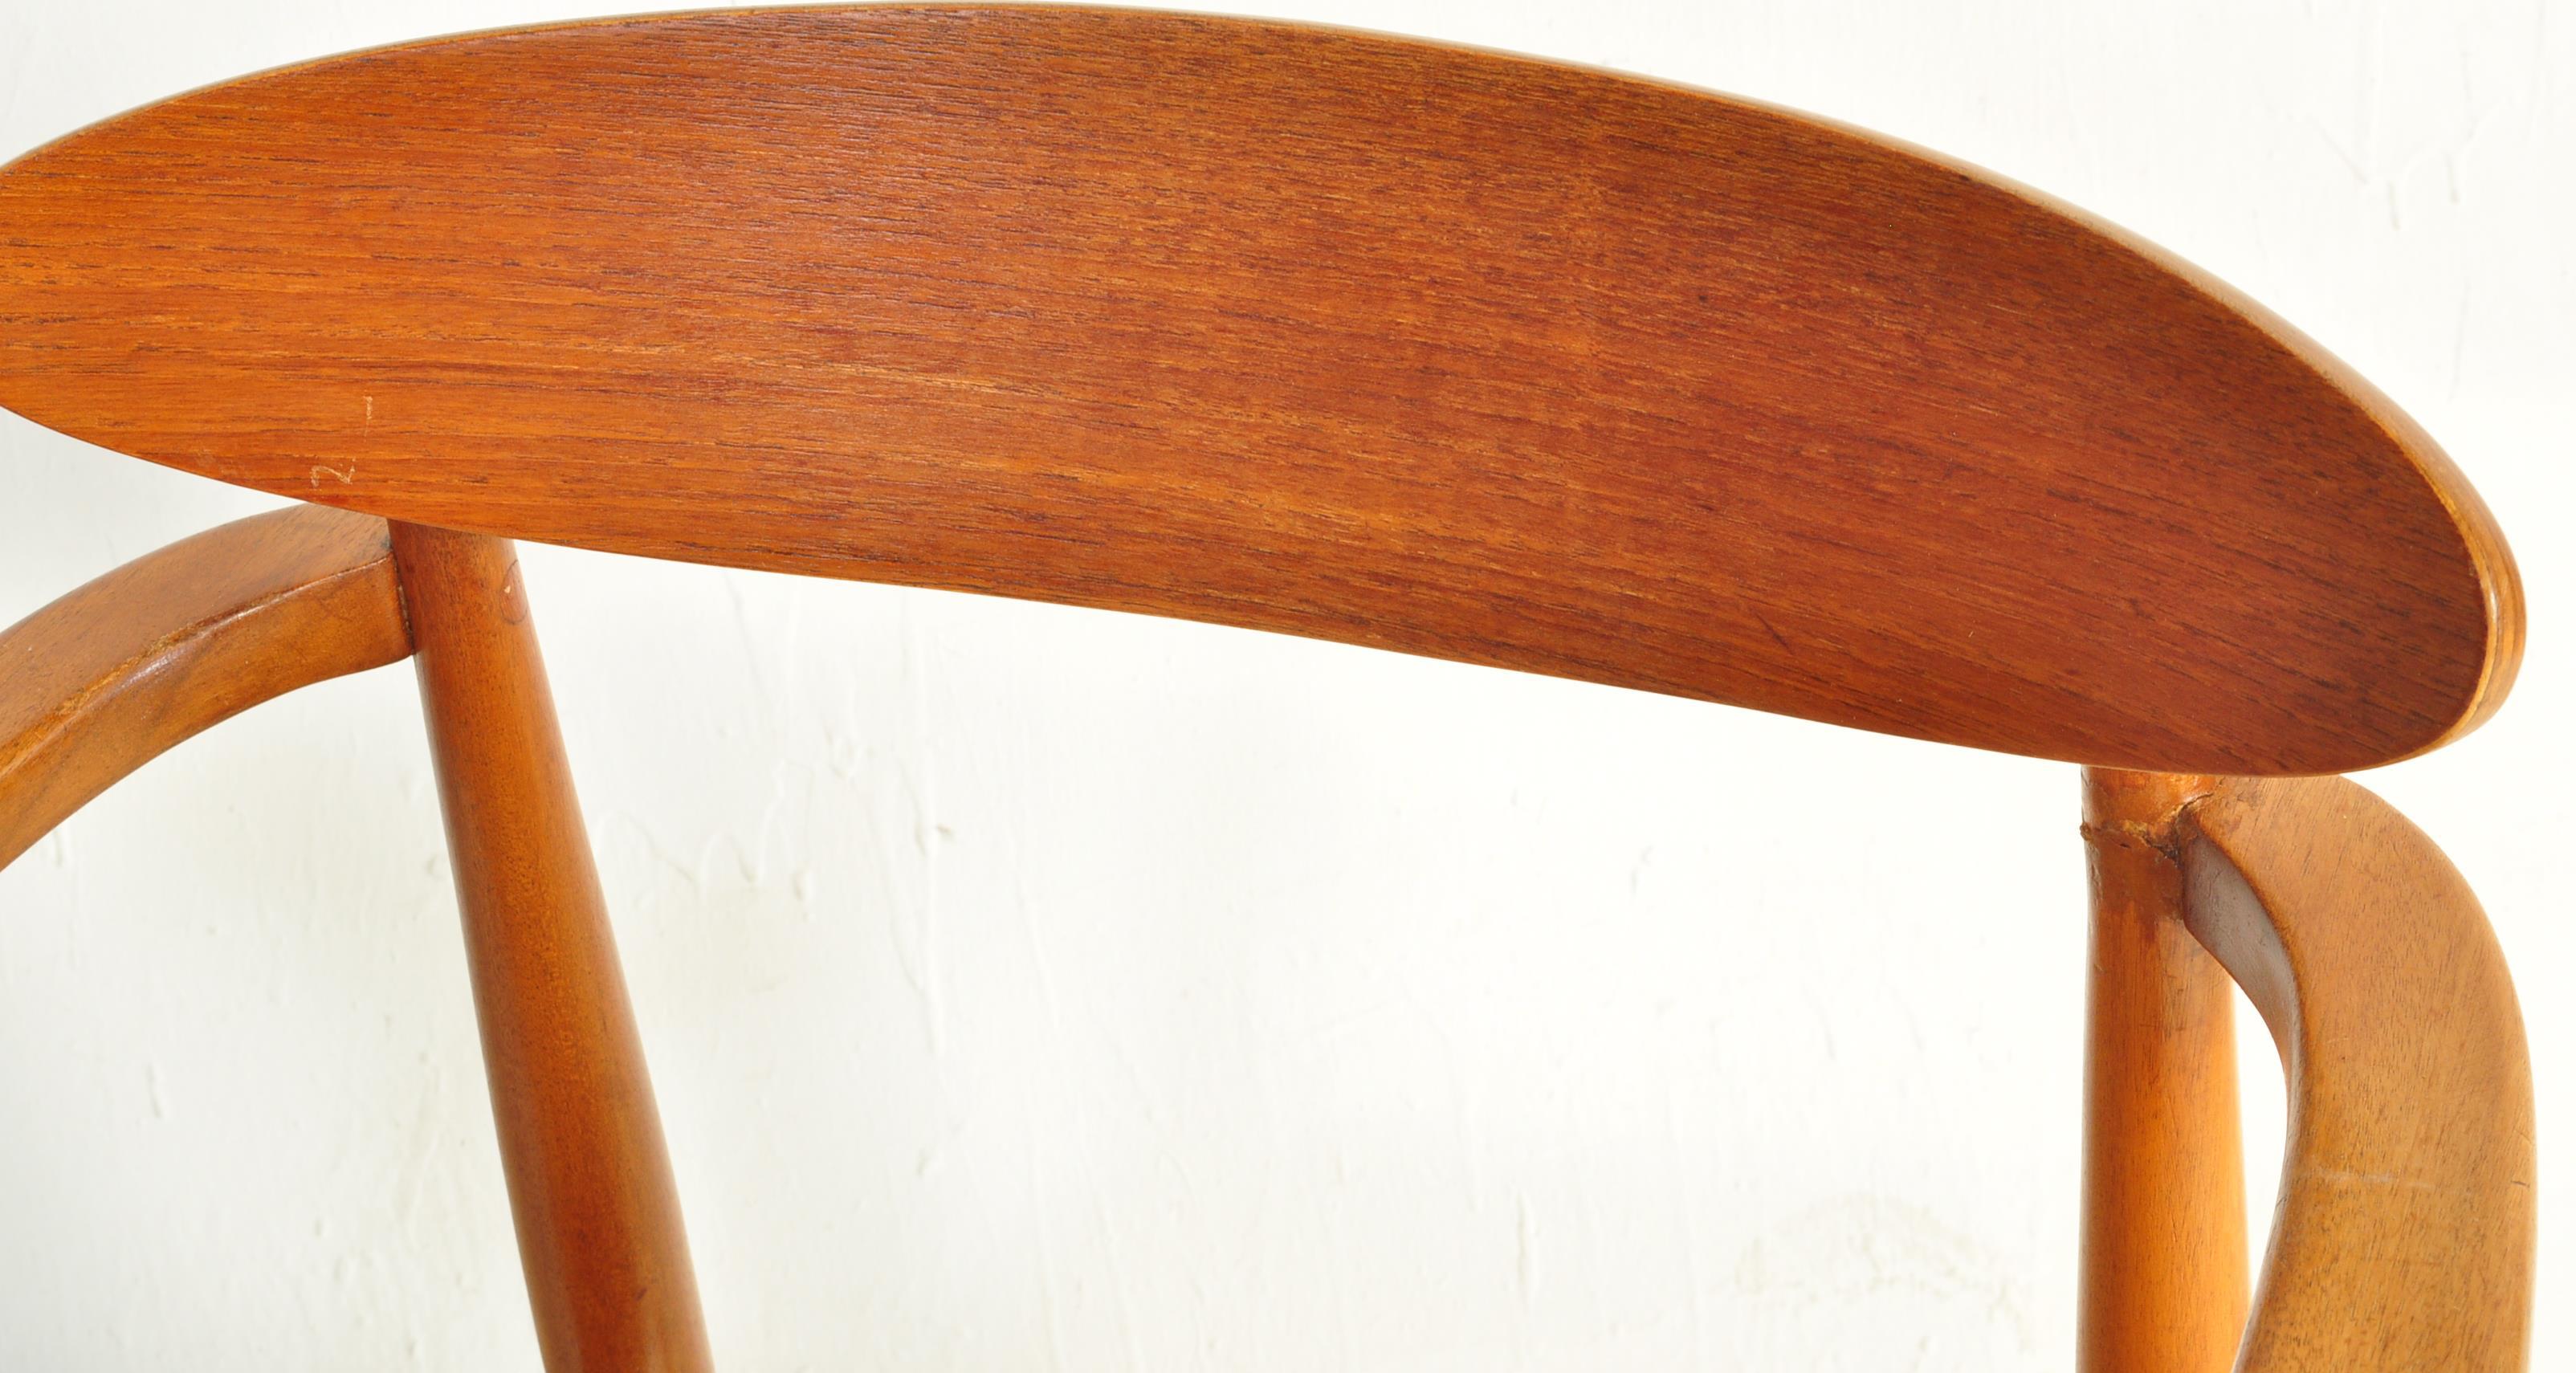 PAIR OF MID 20TH CENTURY DANISH TEAK DINING CHAIRS CARVERS - Image 3 of 5